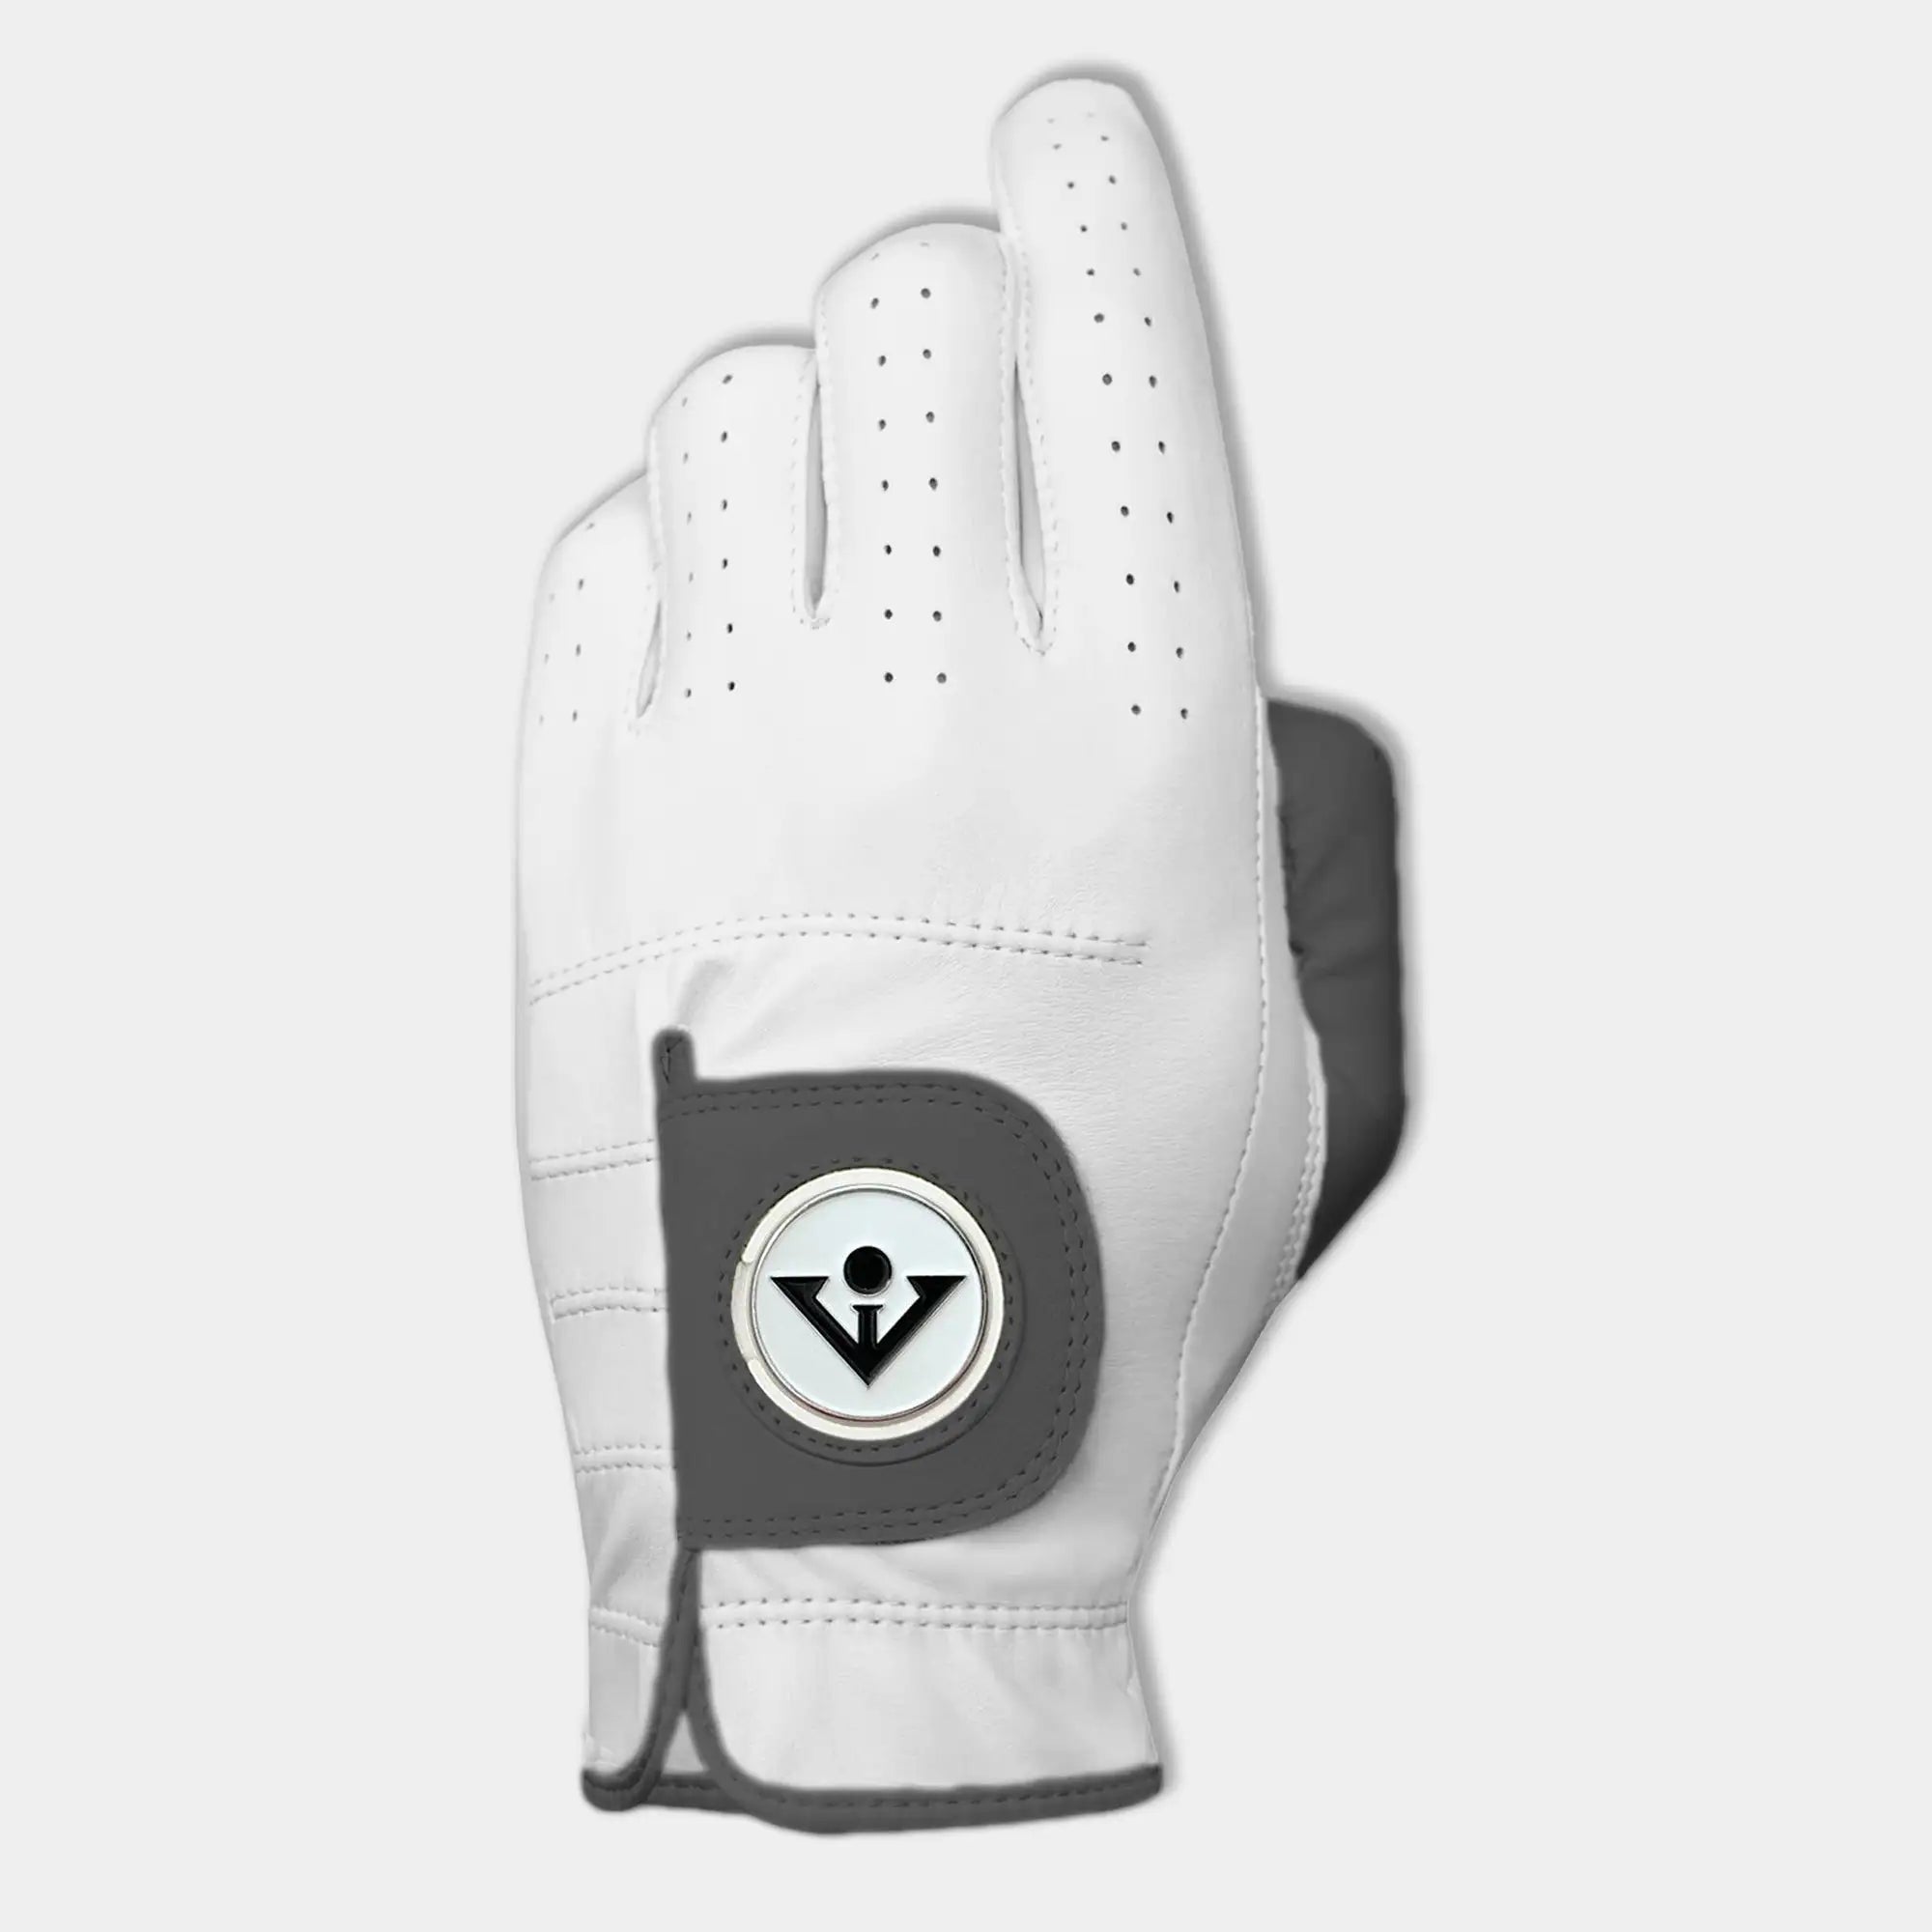 White and gray Golf glove with gray pull tab and thumb, for women. Women's Designer Golf Gloves